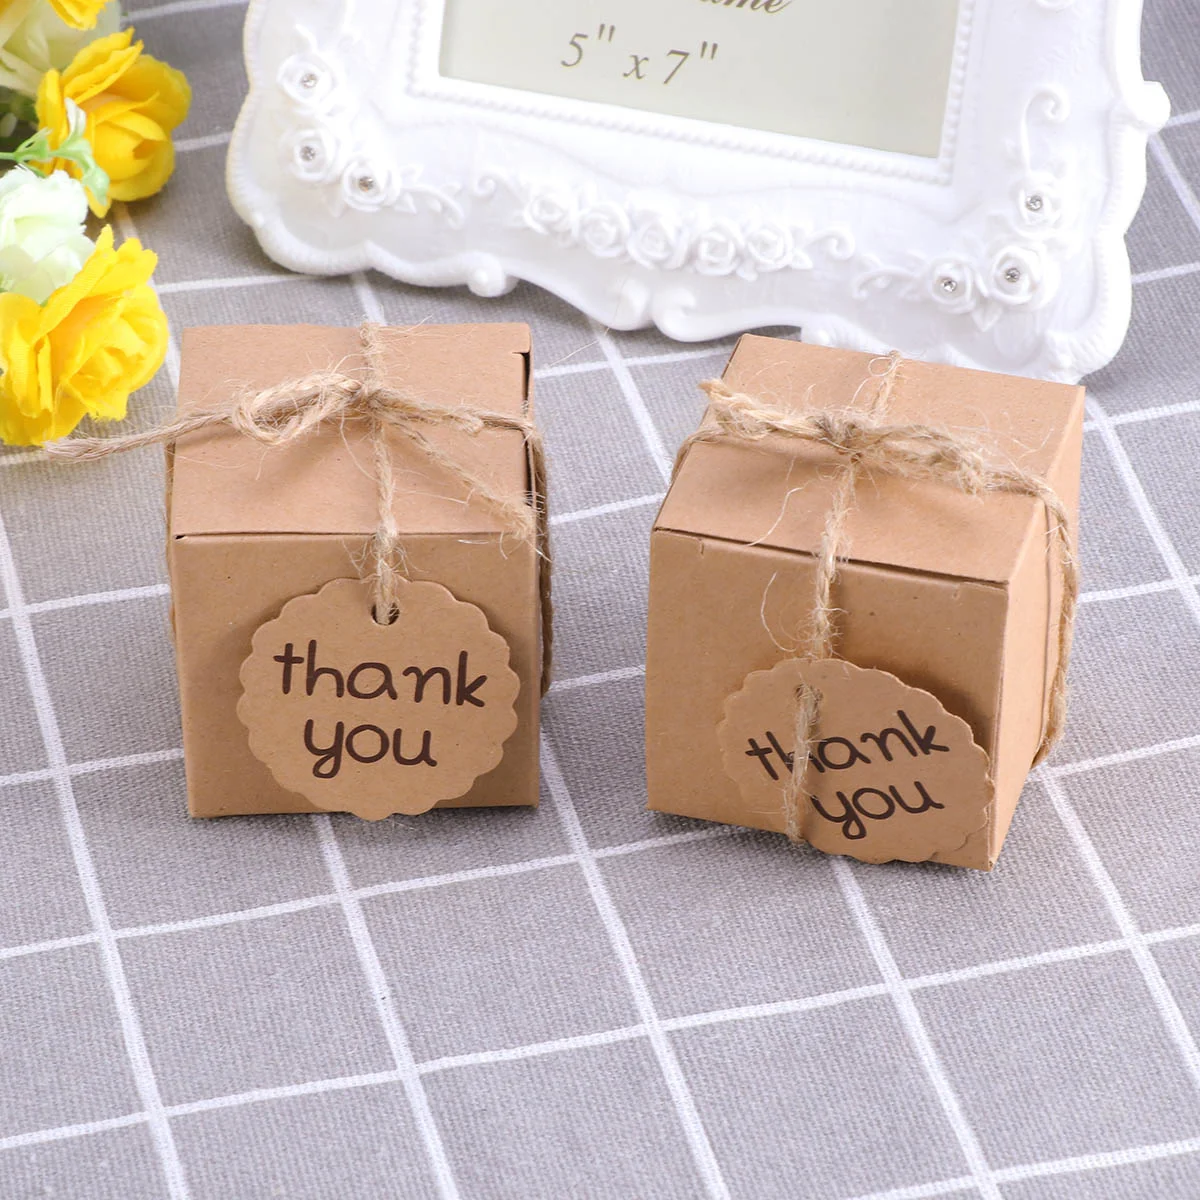 

Boxes Gift Candy Wedding Kraft Paper You Thank Favor Treat Box Brown Cookie Christmas Party Lids Giving Tiny Cotton Earrings